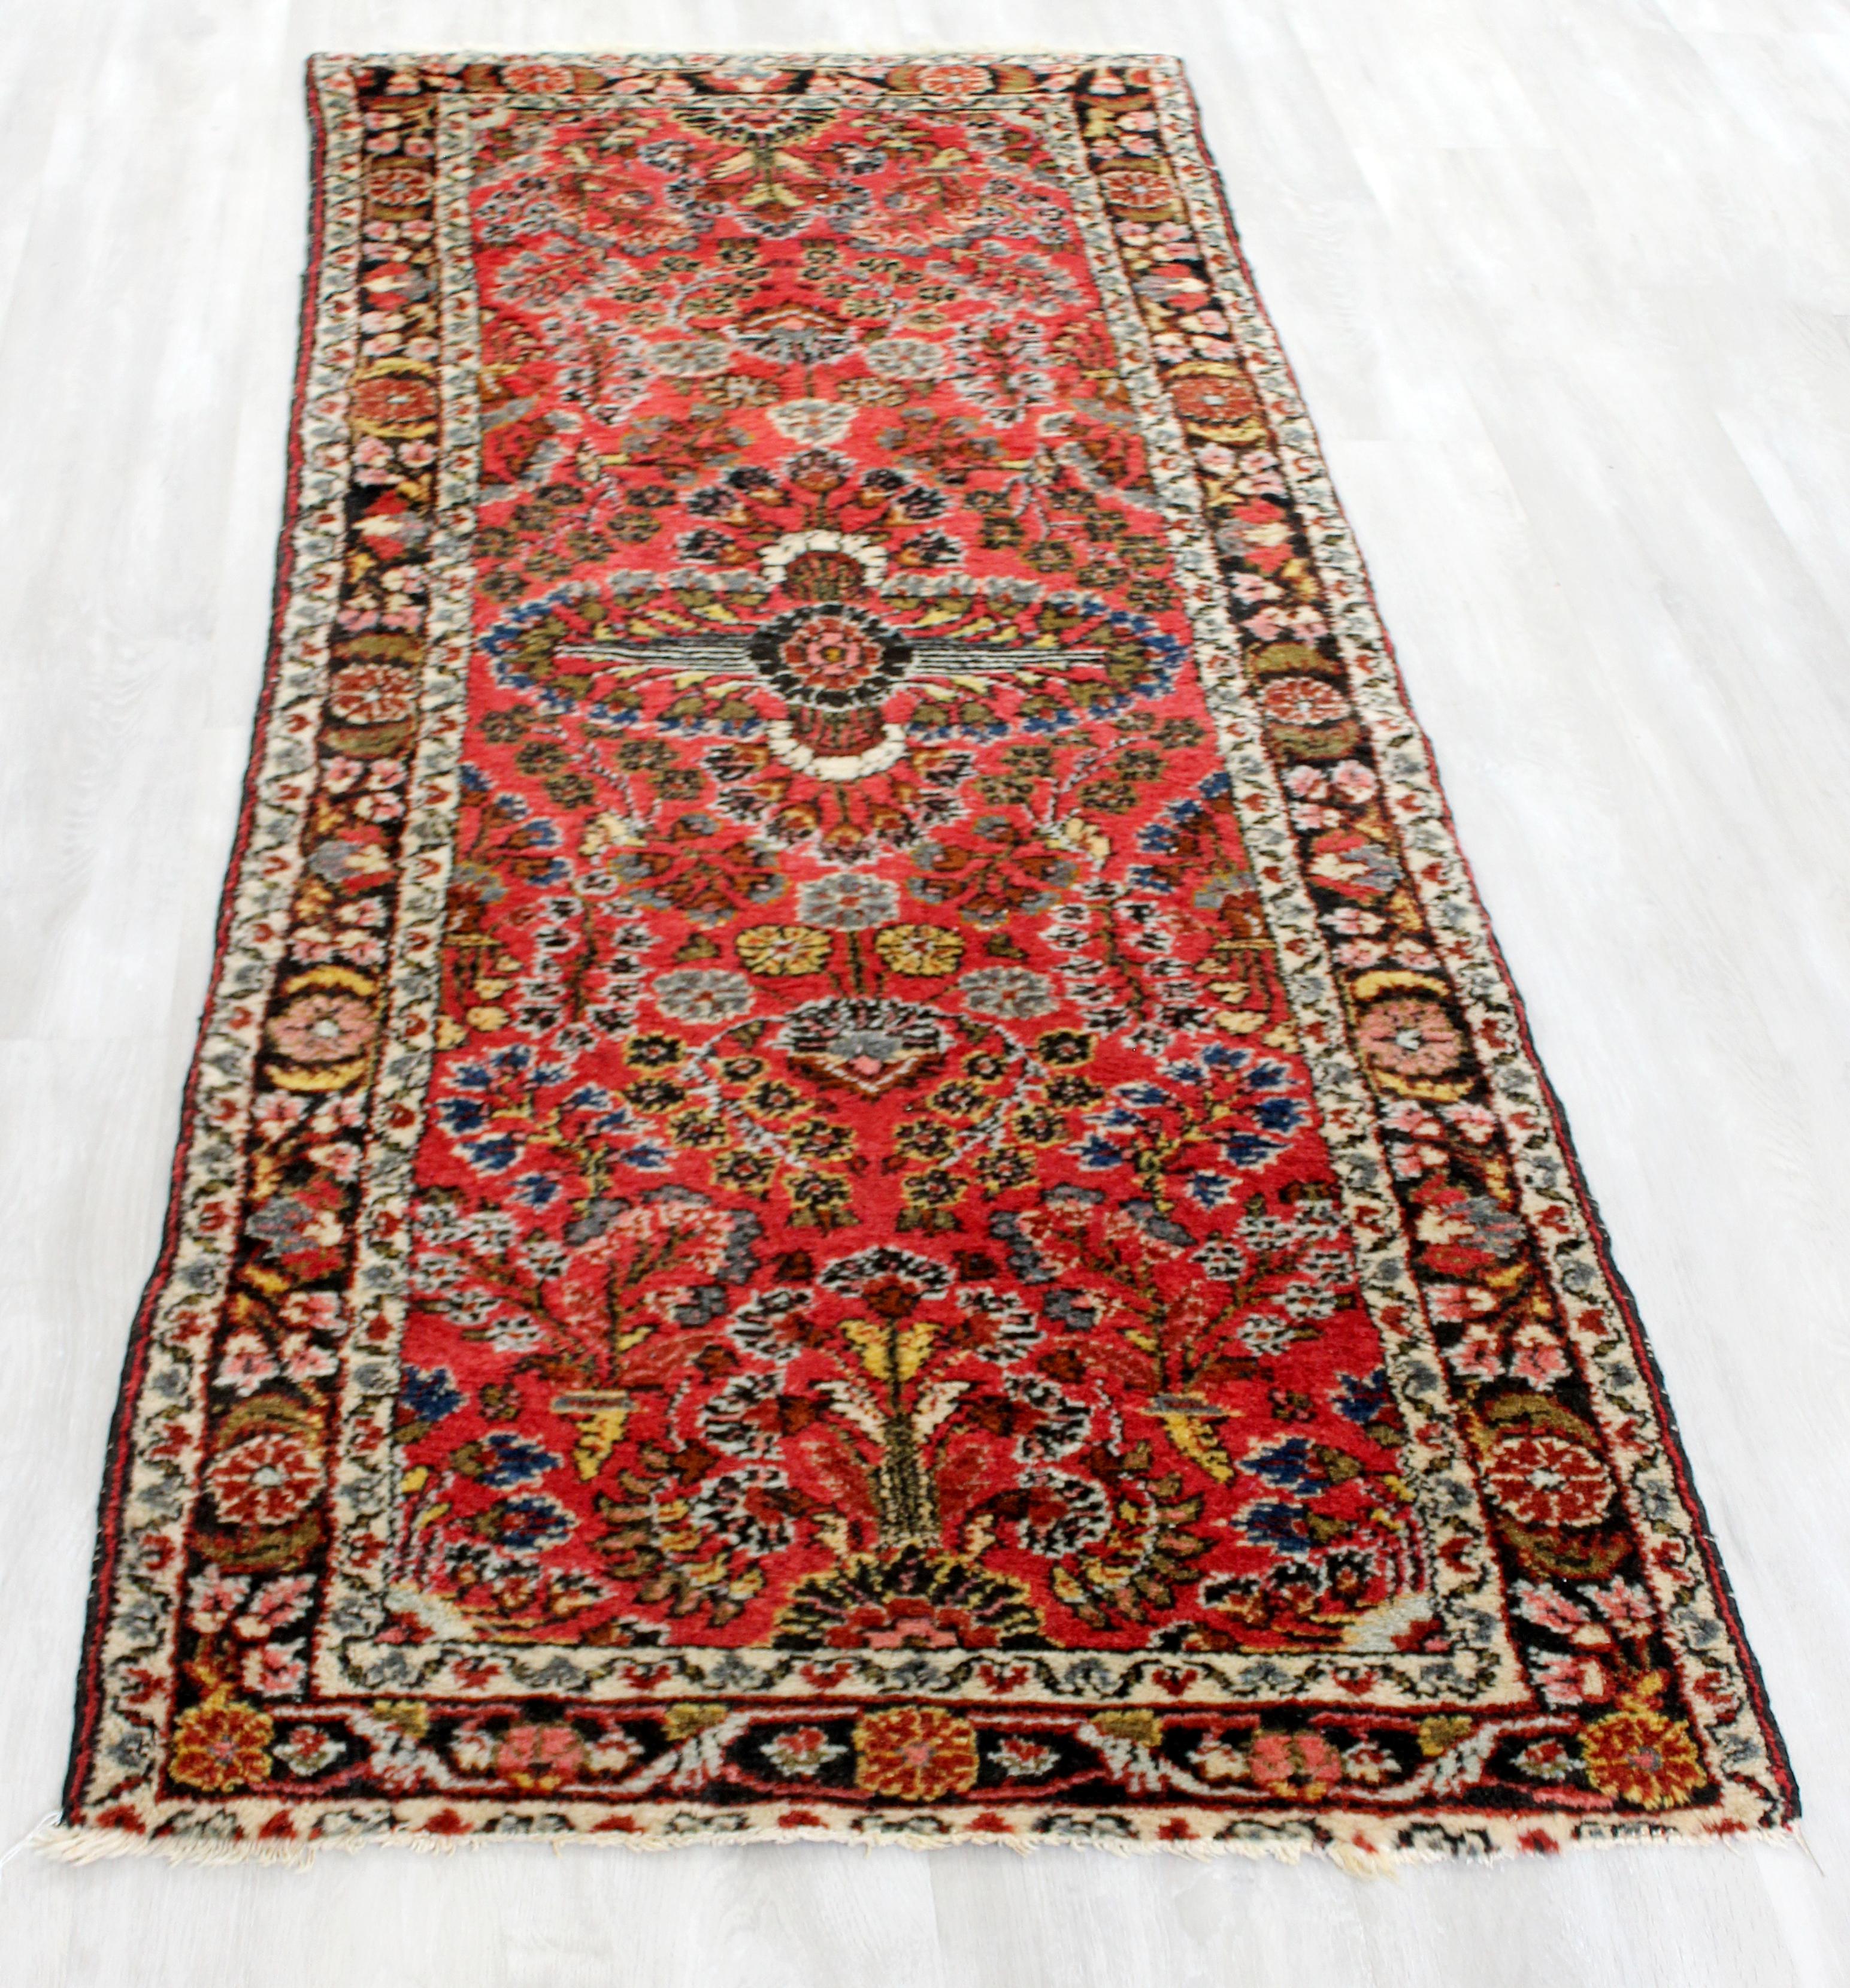 For your consideration is a beautiful and long, hand knotted wool runner rug. In good vintage condition. The dimensions are 31